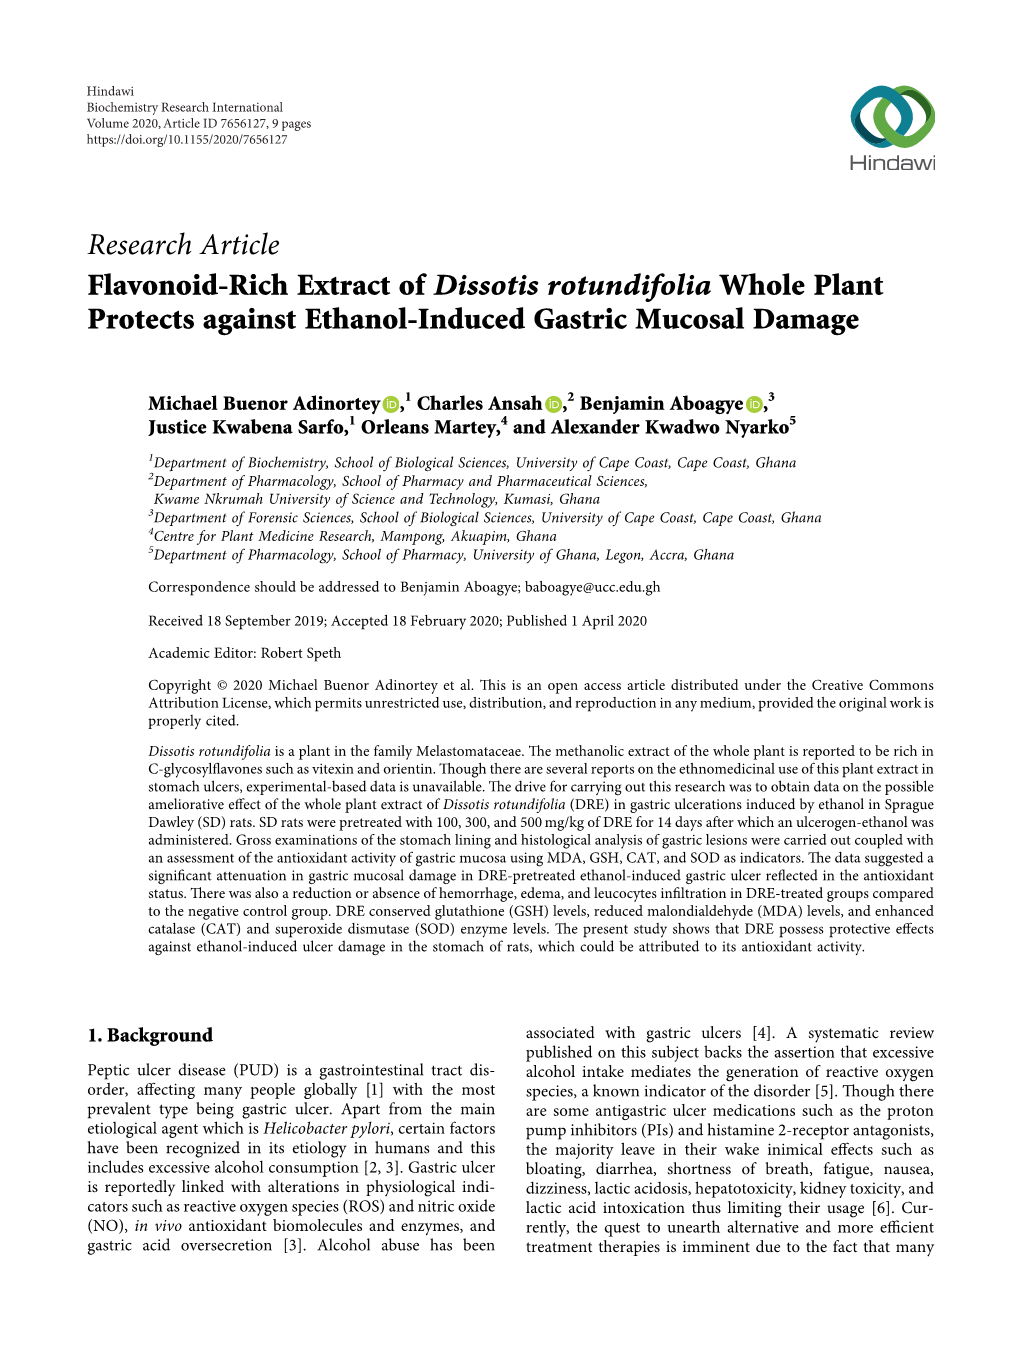 Flavonoid-Rich Extract of Dissotis Rotundifolia Whole Plant Protects Against Ethanol-Induced Gastric Mucosal Damage